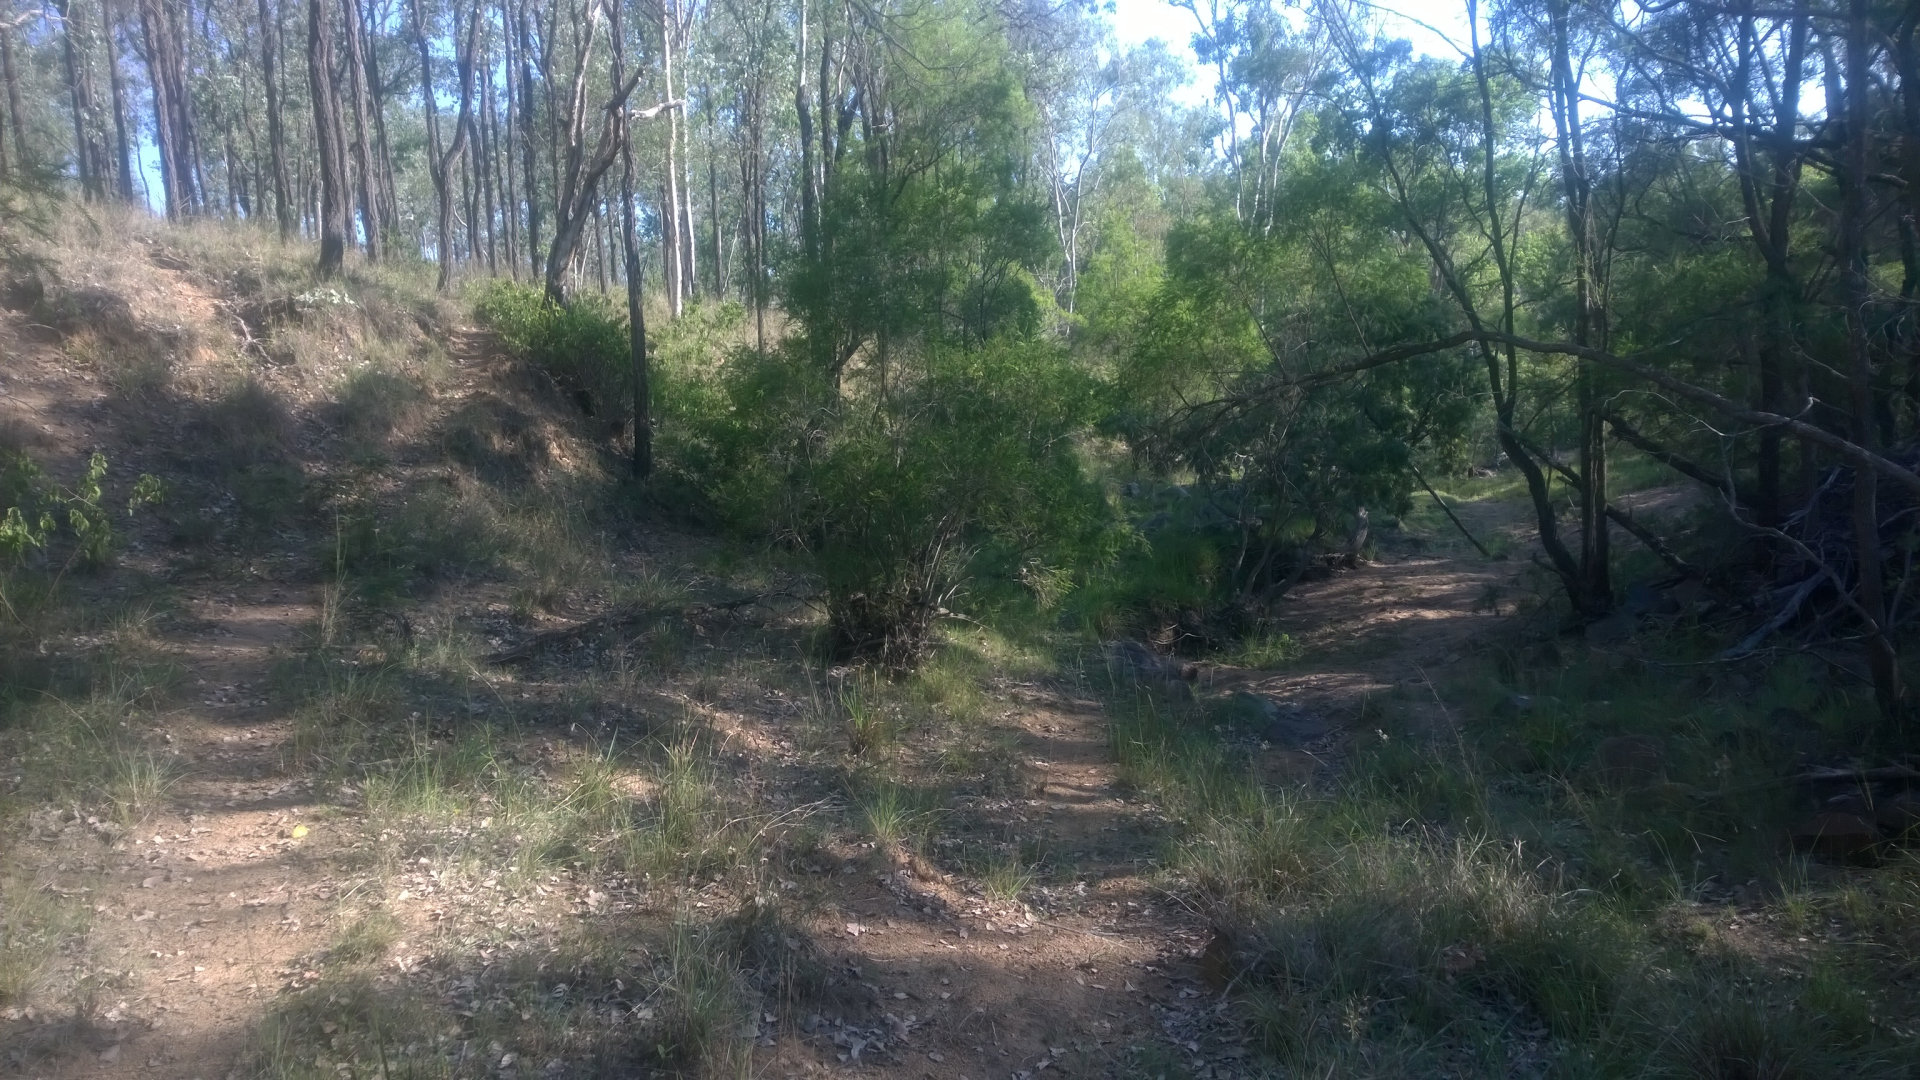 Dry creek area of Seven Mile Diggings, an old gold fossicking area with most of the mining taking place from 1876 to 1900. Alluvial gold can still be found